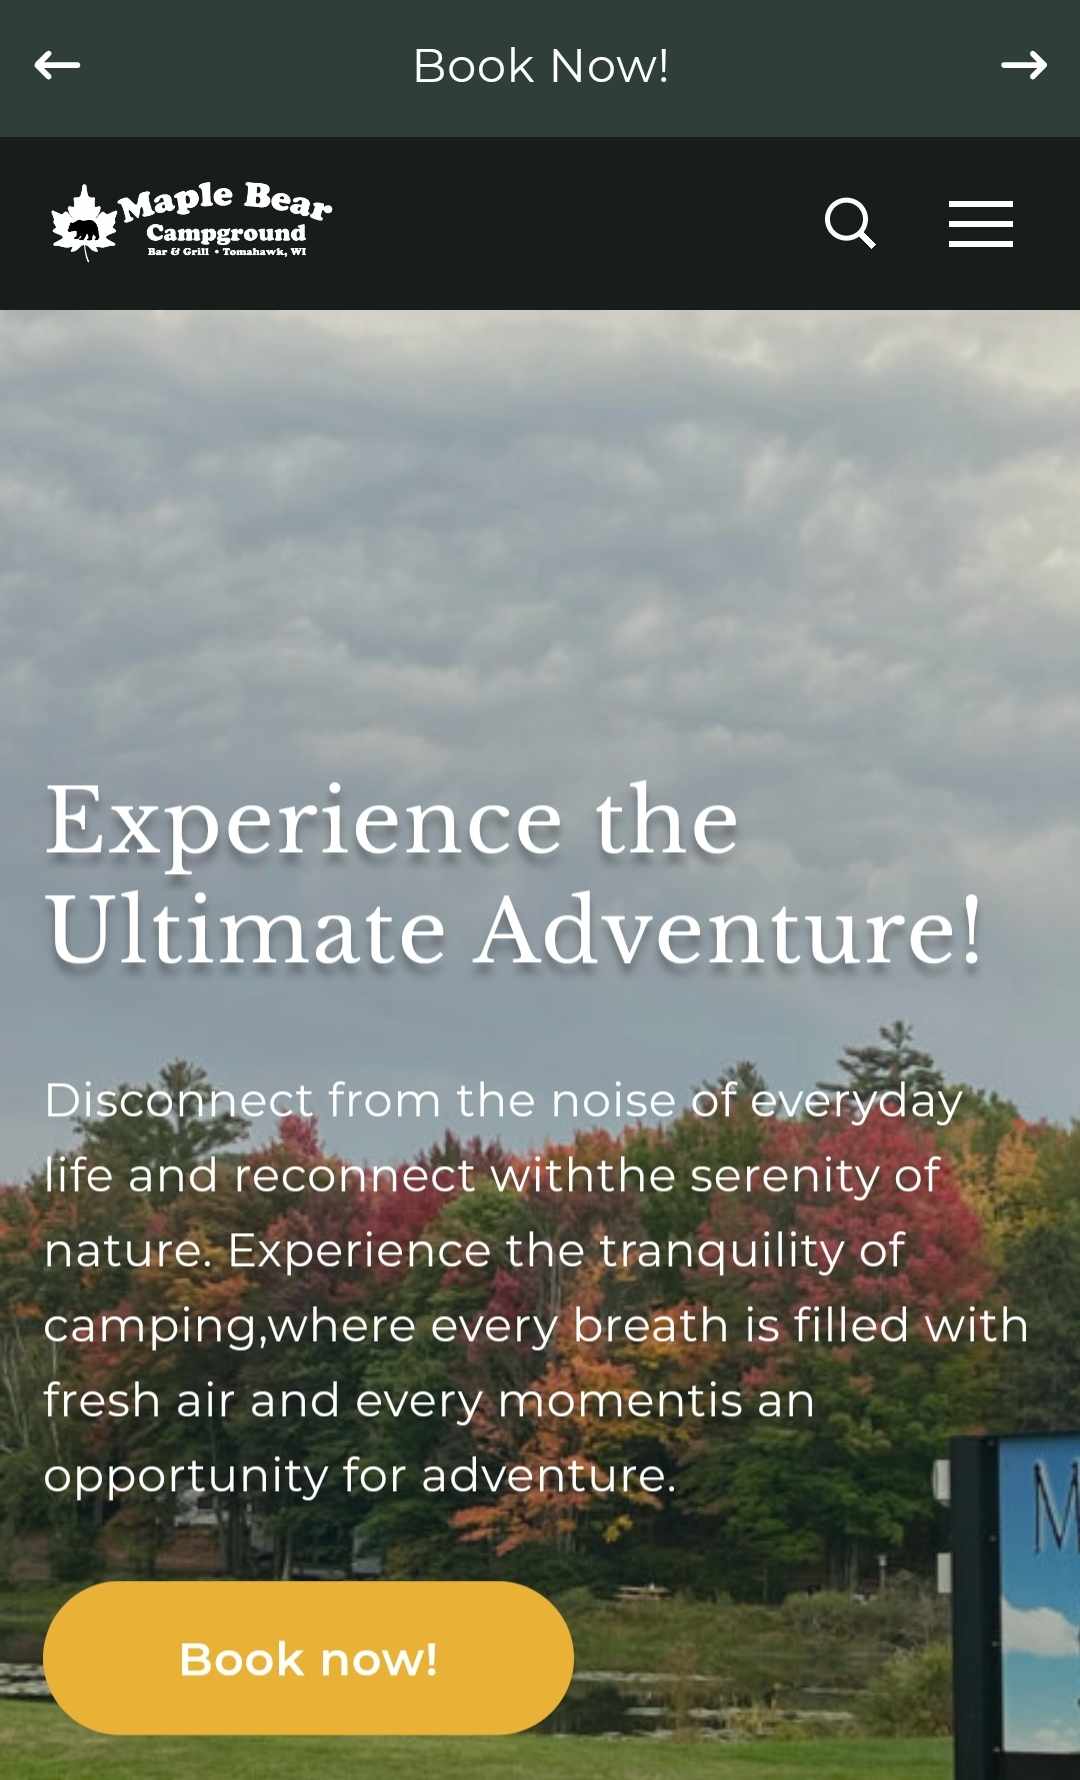 Bastian Marketing website for Maple Bear Campground